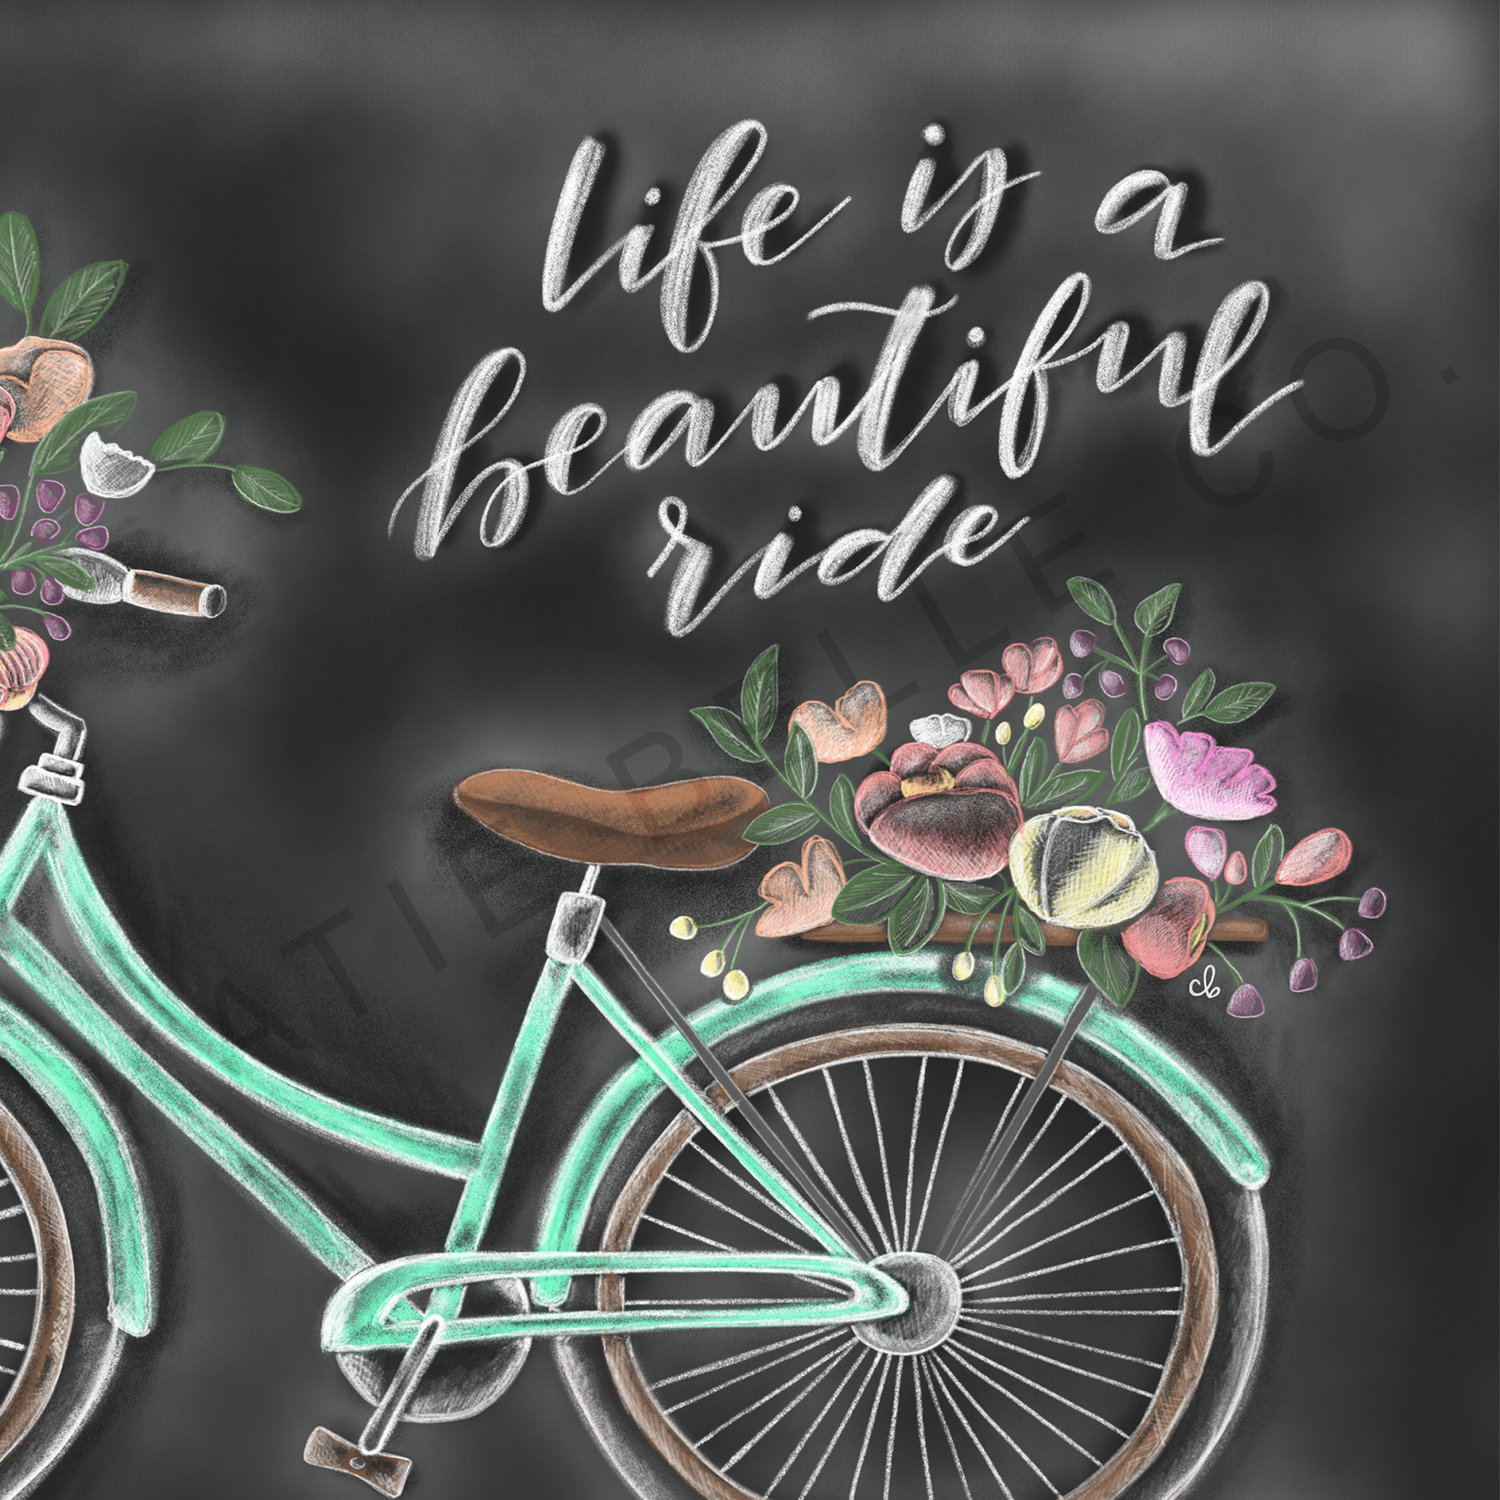 life is a beautiful ride. bicycle with flower baskets. blue bicycle. enjoy the ride. spring decor. spring art. chalk art. chalkboard print. bicycle artwork. 8x10 print. unframed art. 